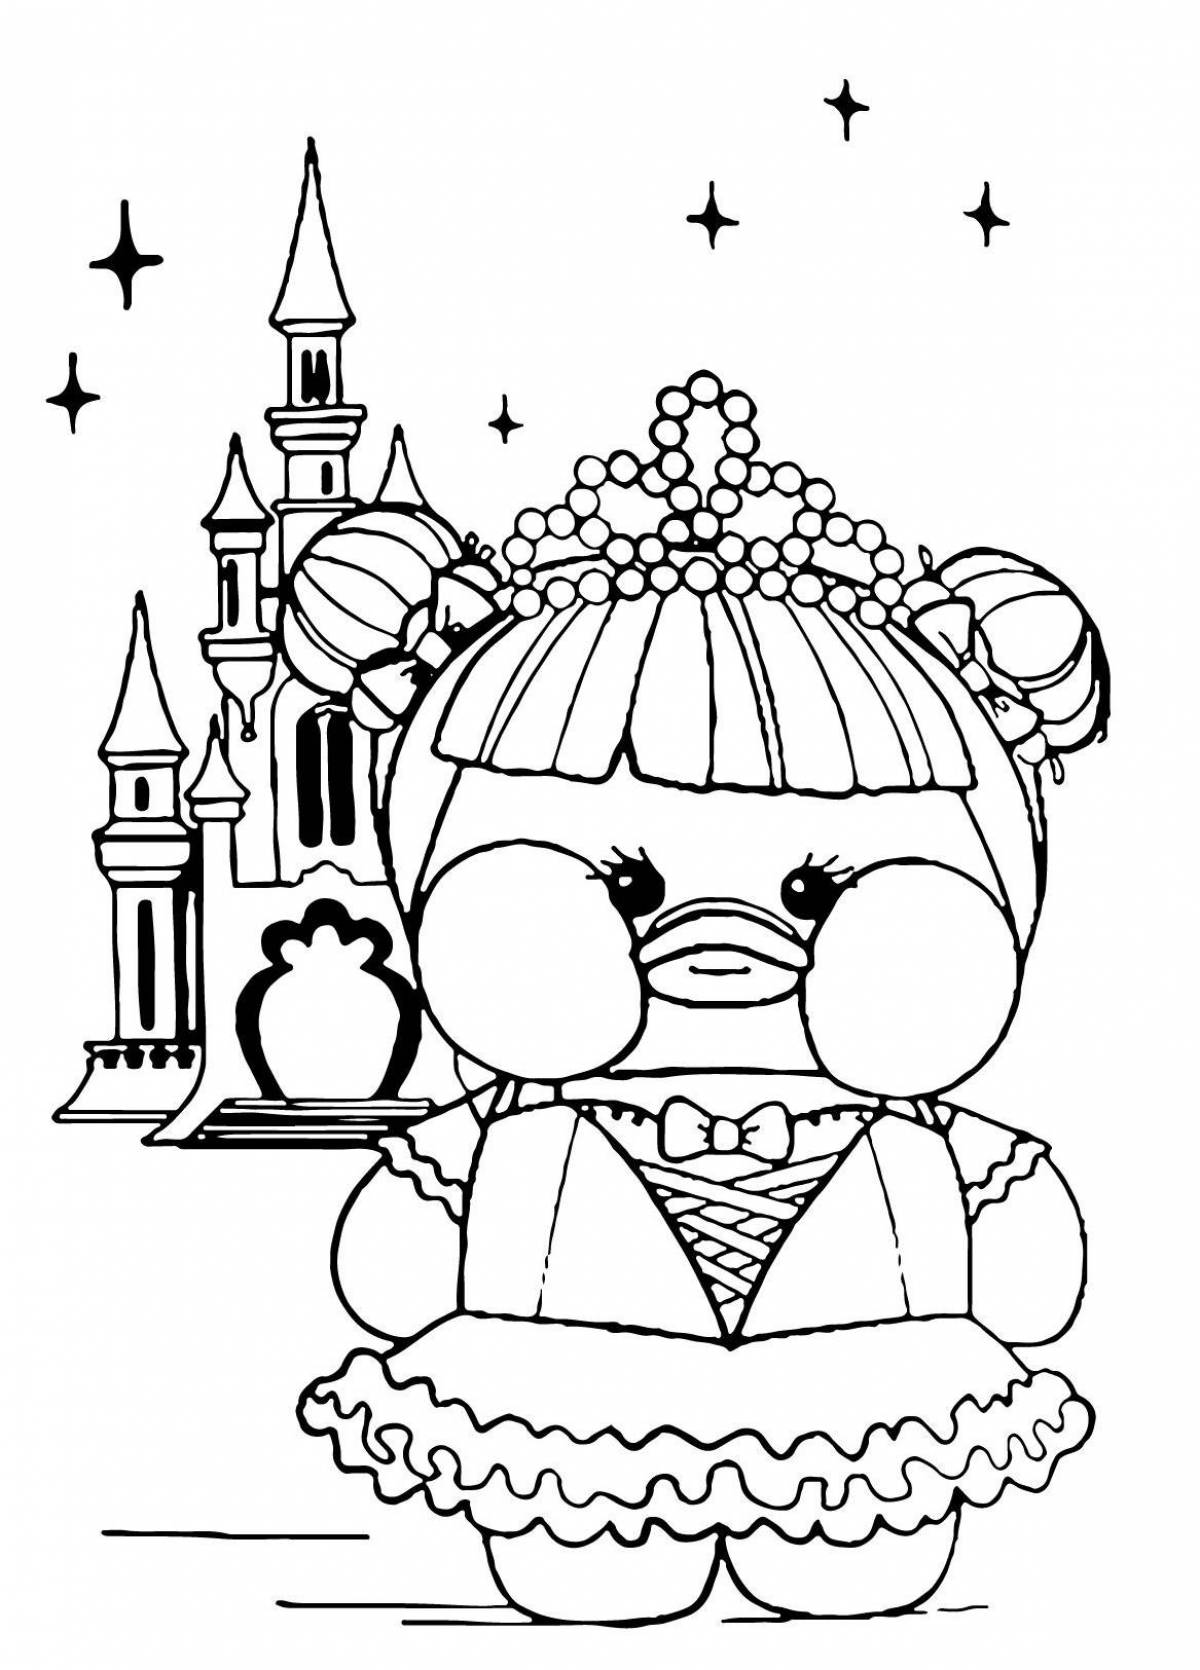 Charming duck lalafanfan coloring book